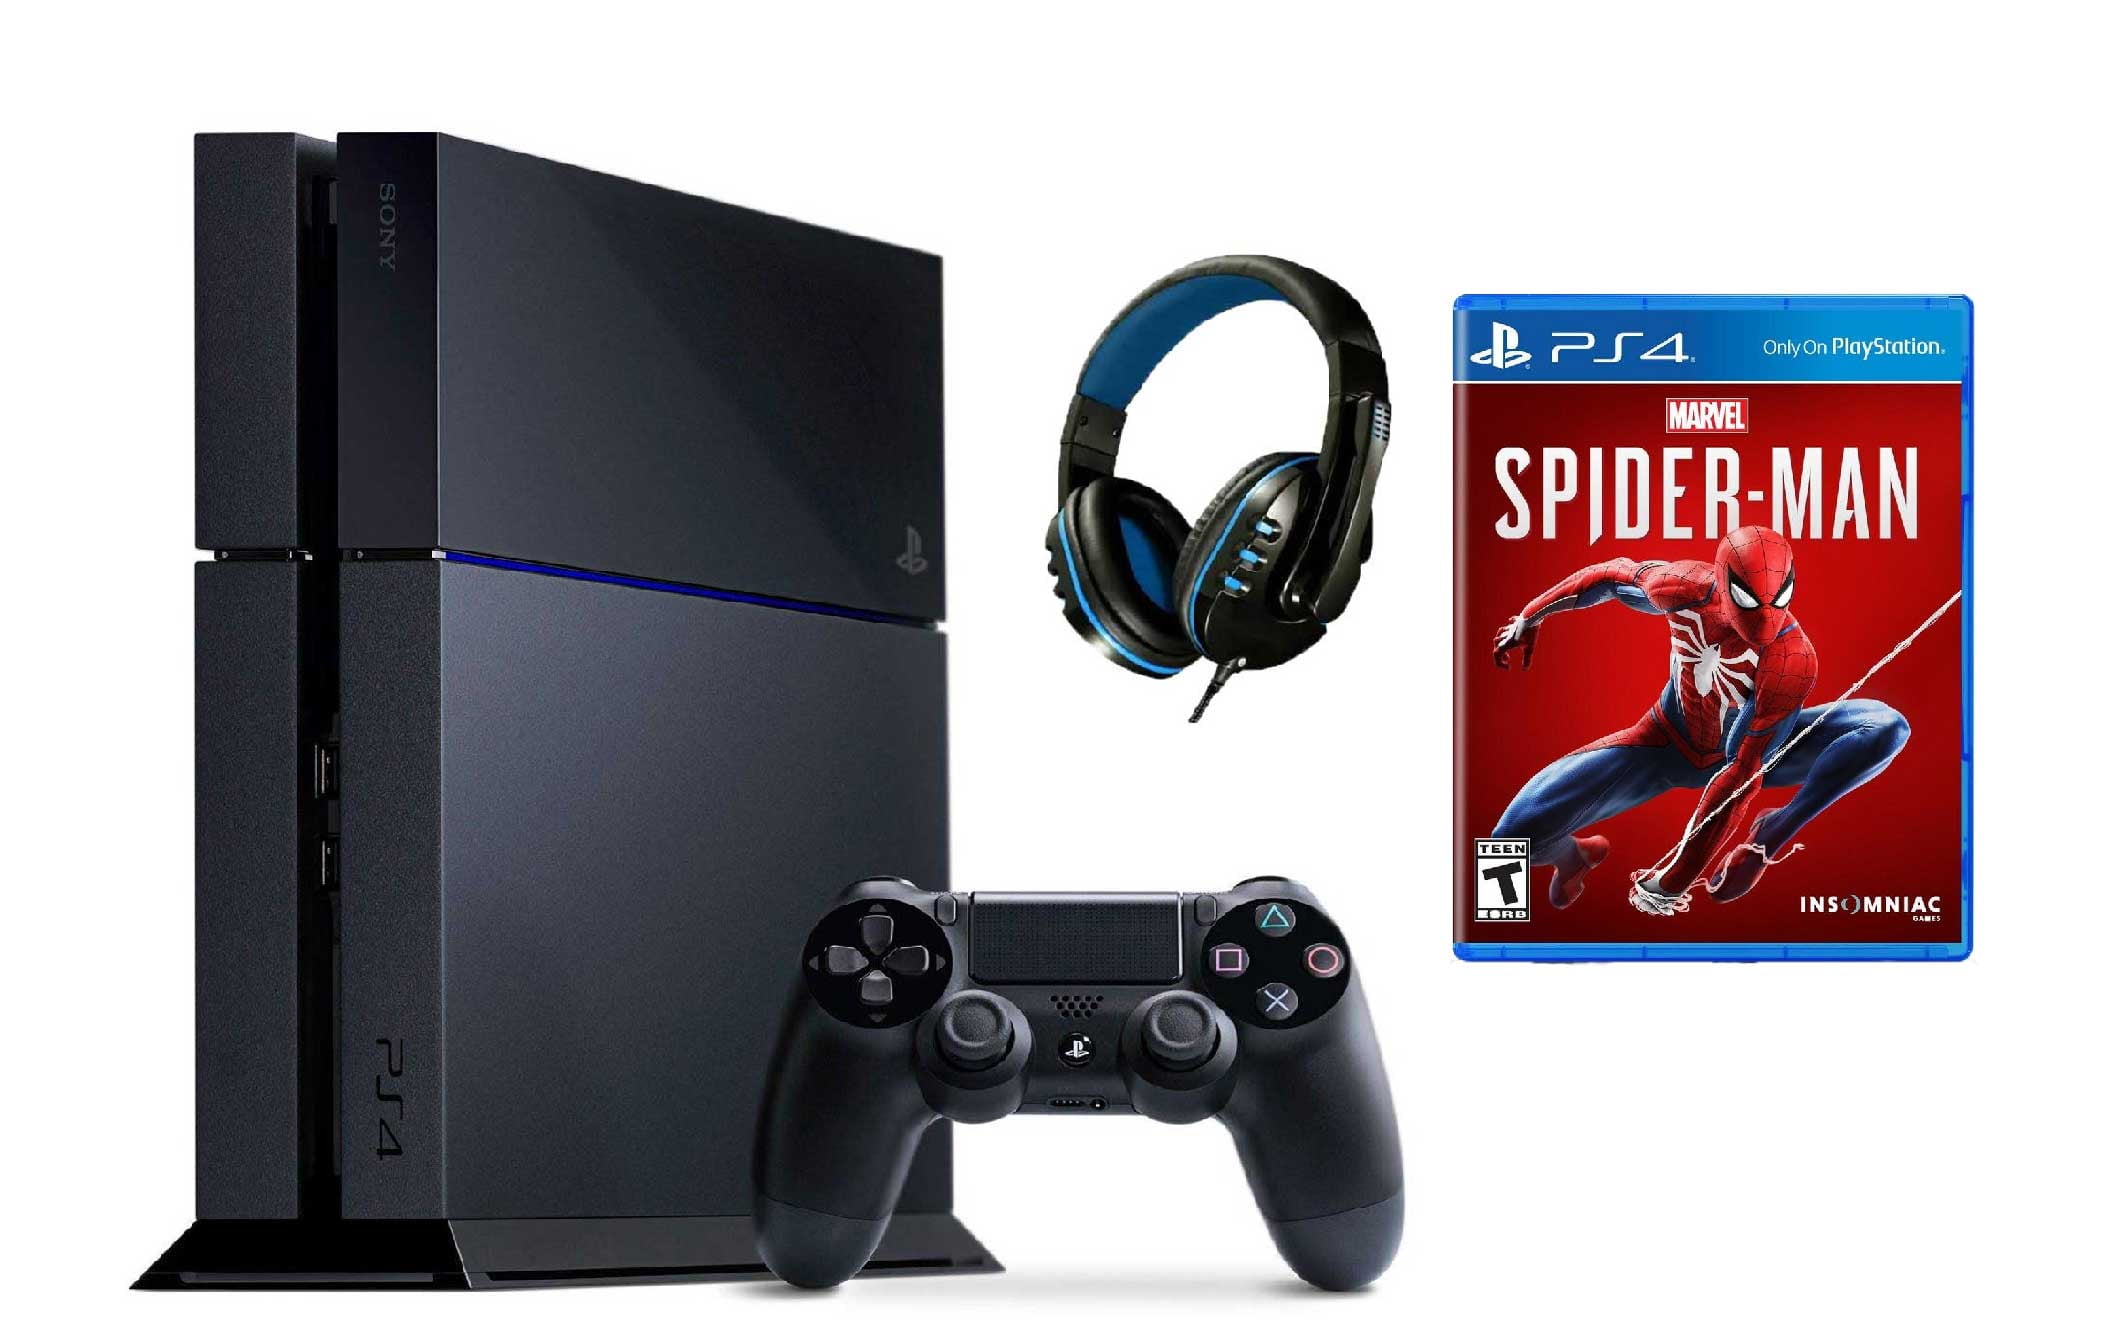 PS4 Games / PlayStation 4 Video Games, Le Vend Online